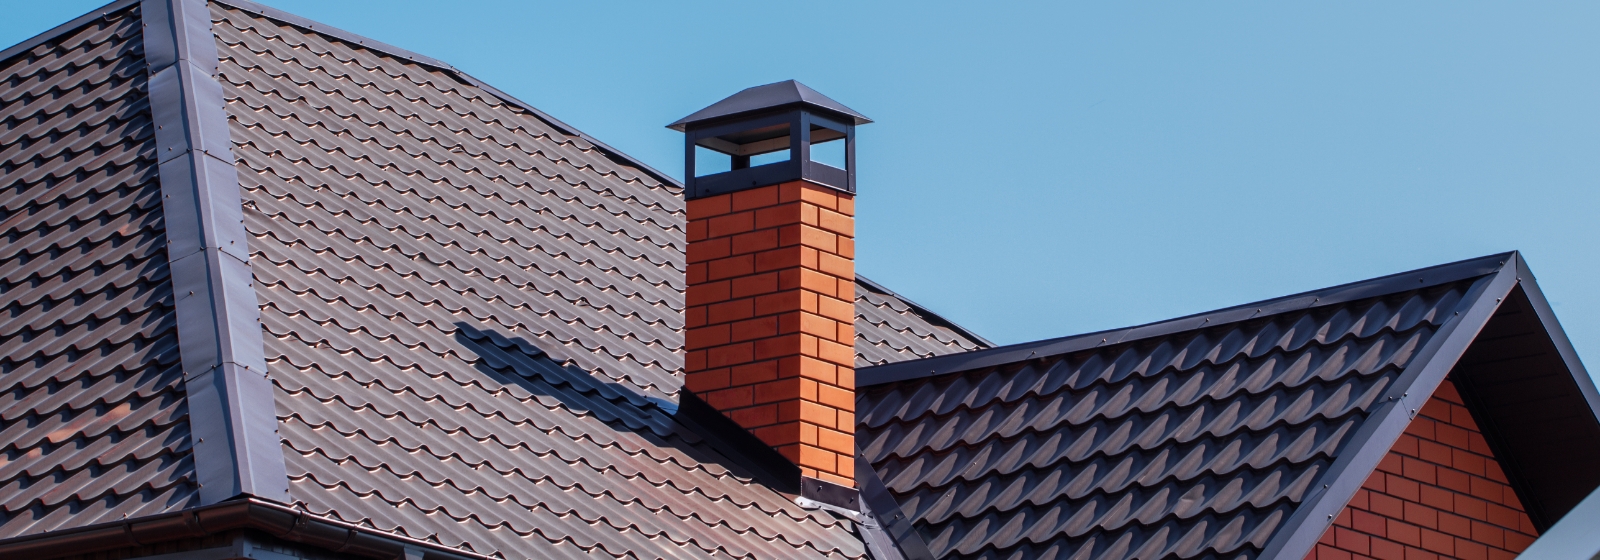 A roof with new shingles and a red brick chimney.